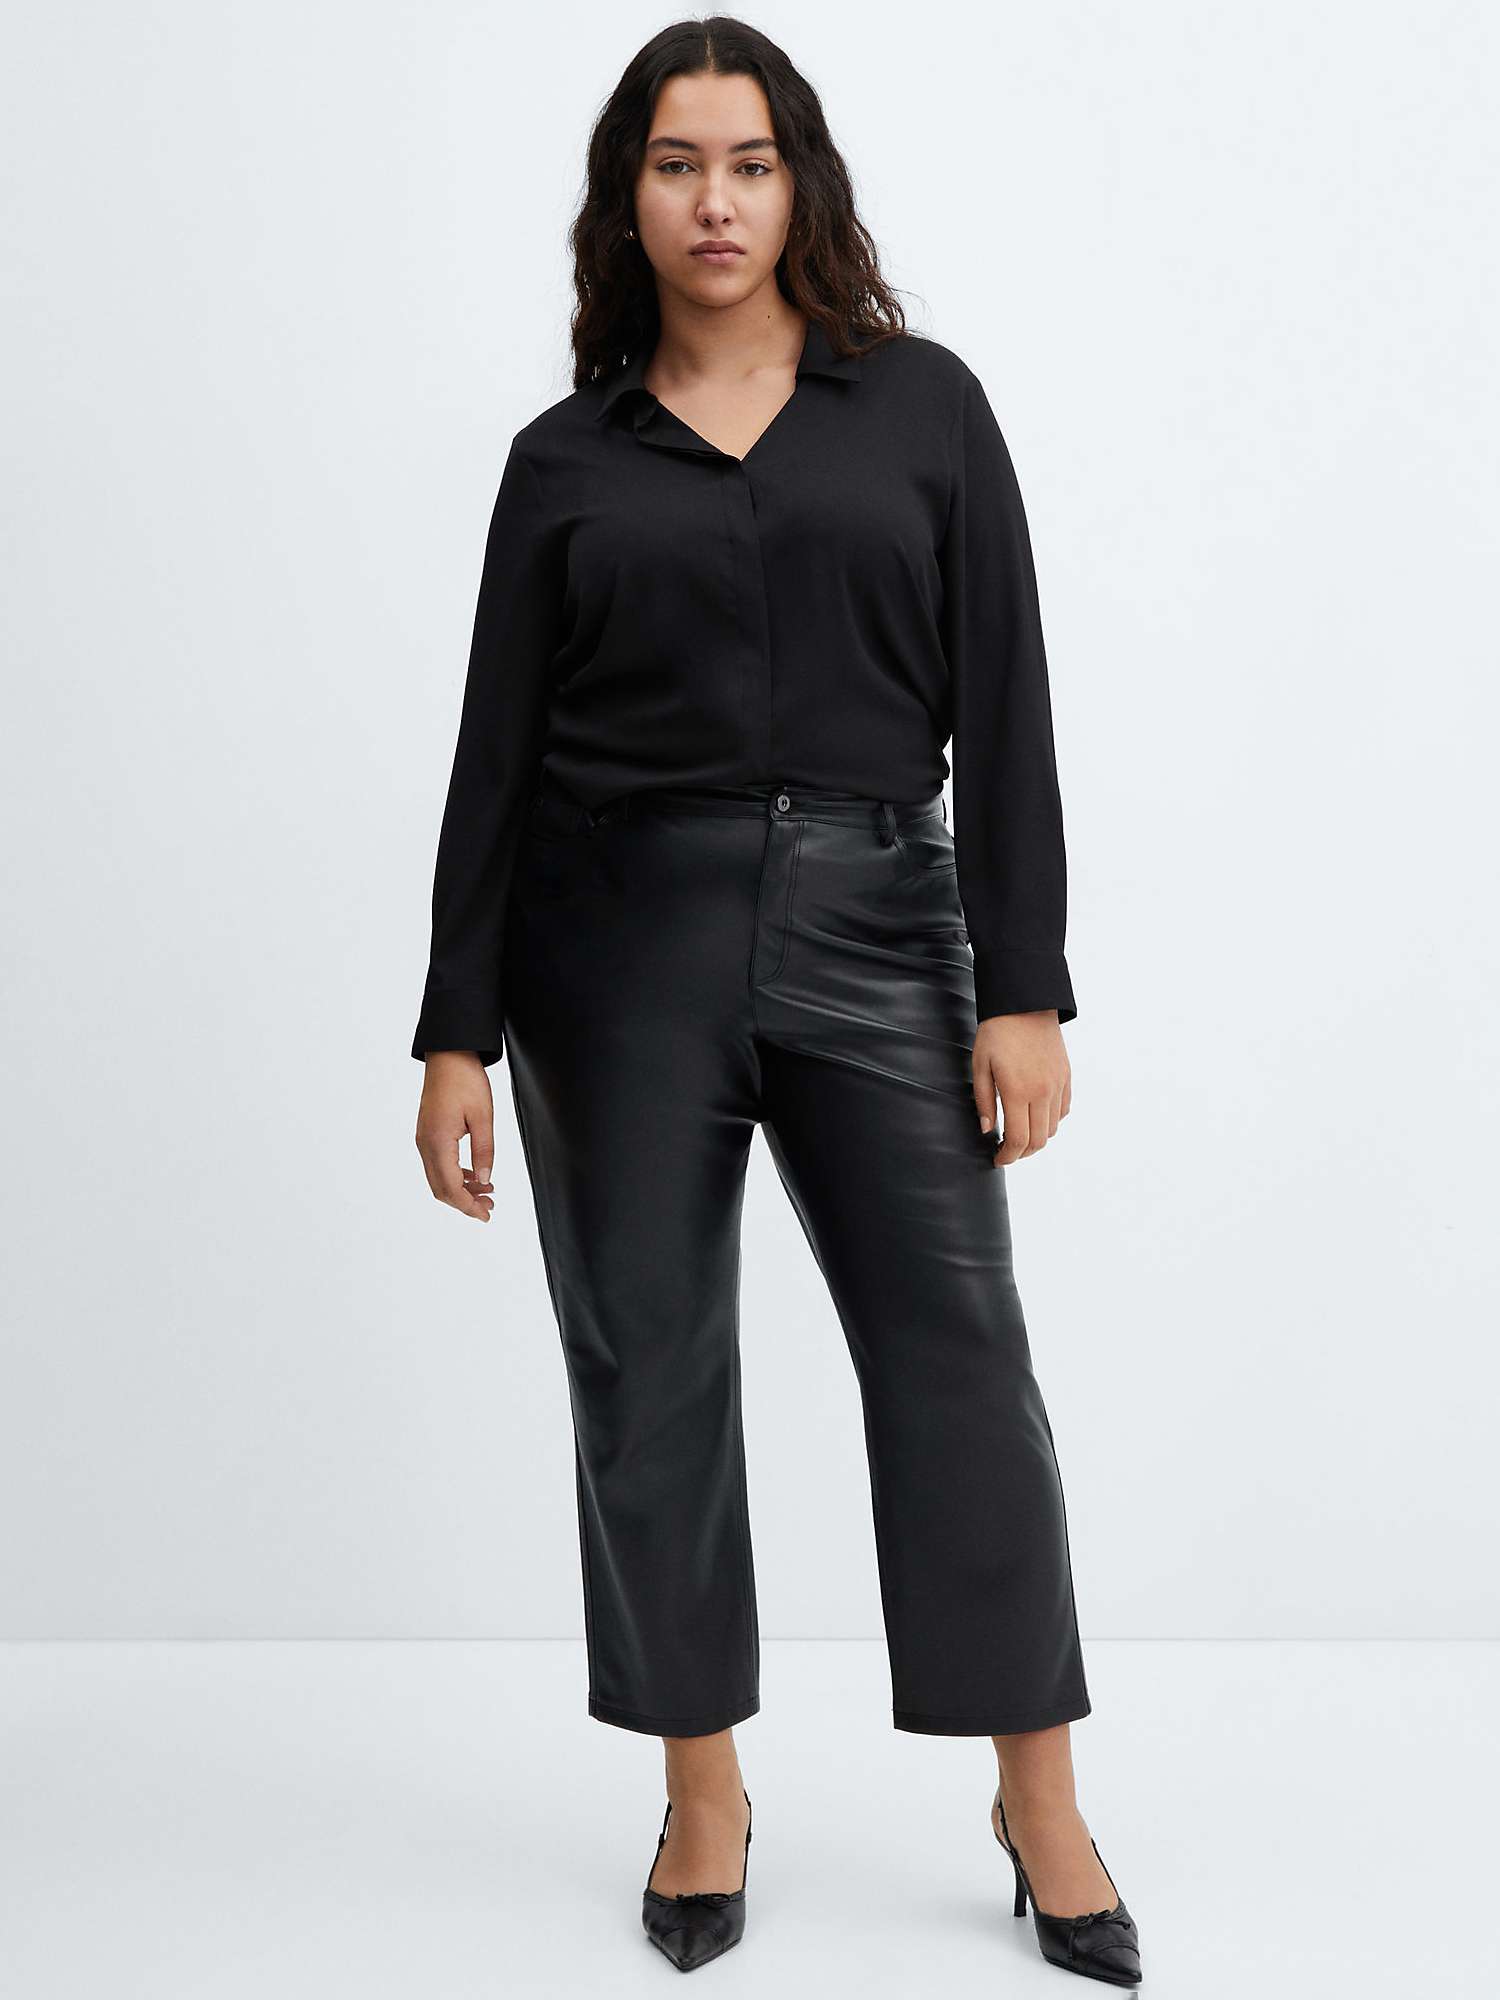 Buy Mango Lille Leather Effect Straight Trousers, Black Online at johnlewis.com